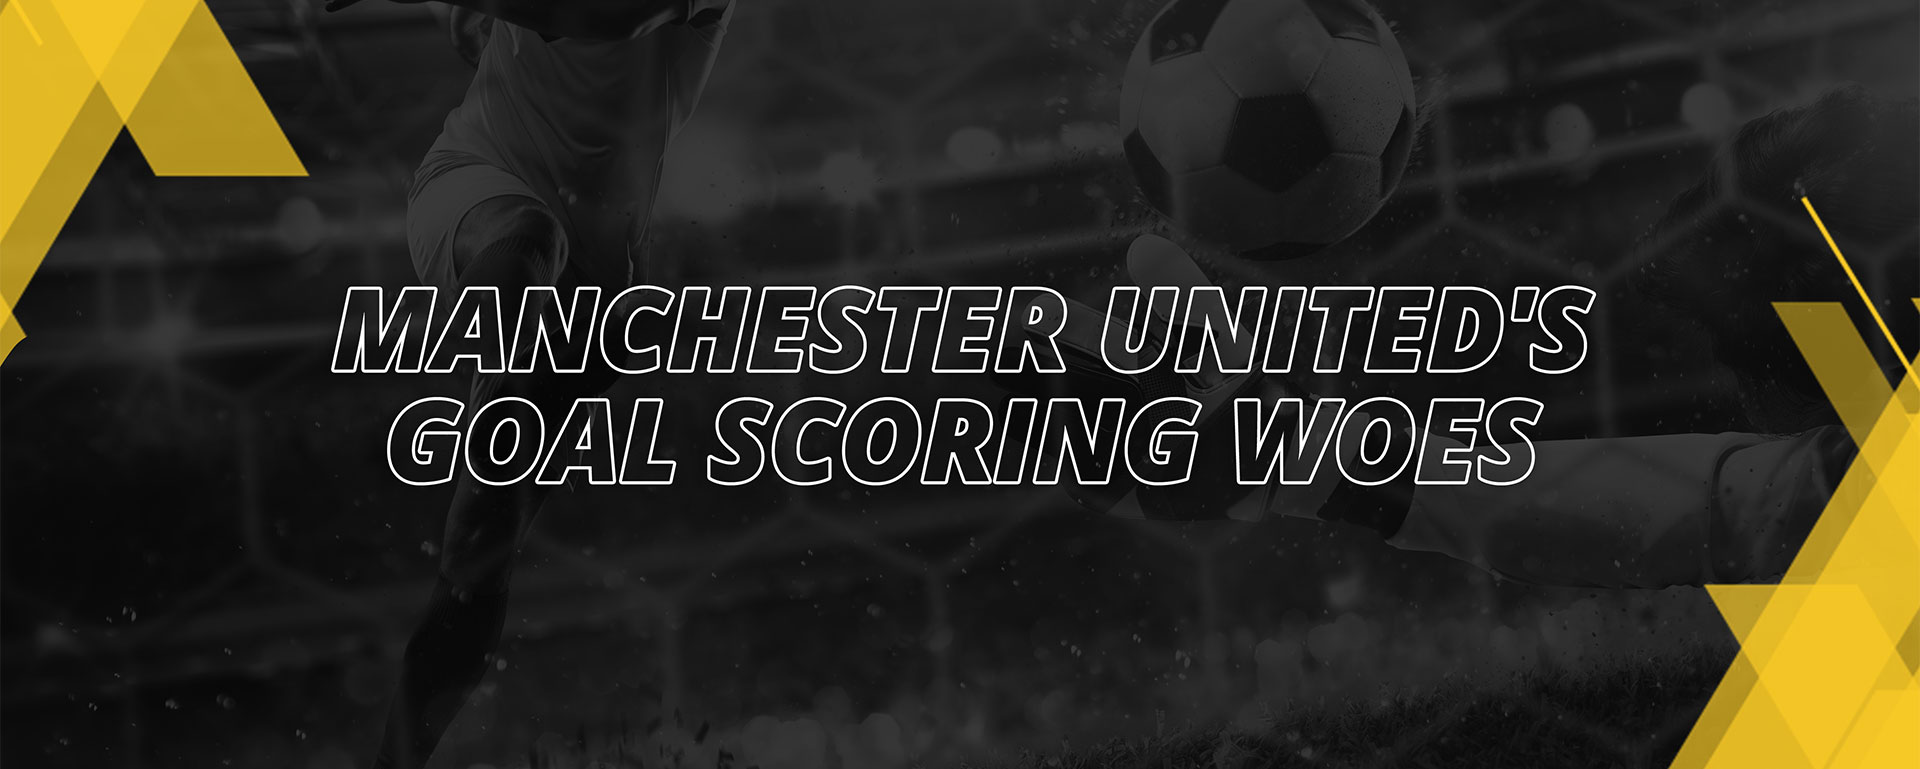 MANCHESTER UNITED’S GOAL-SCORING WOES